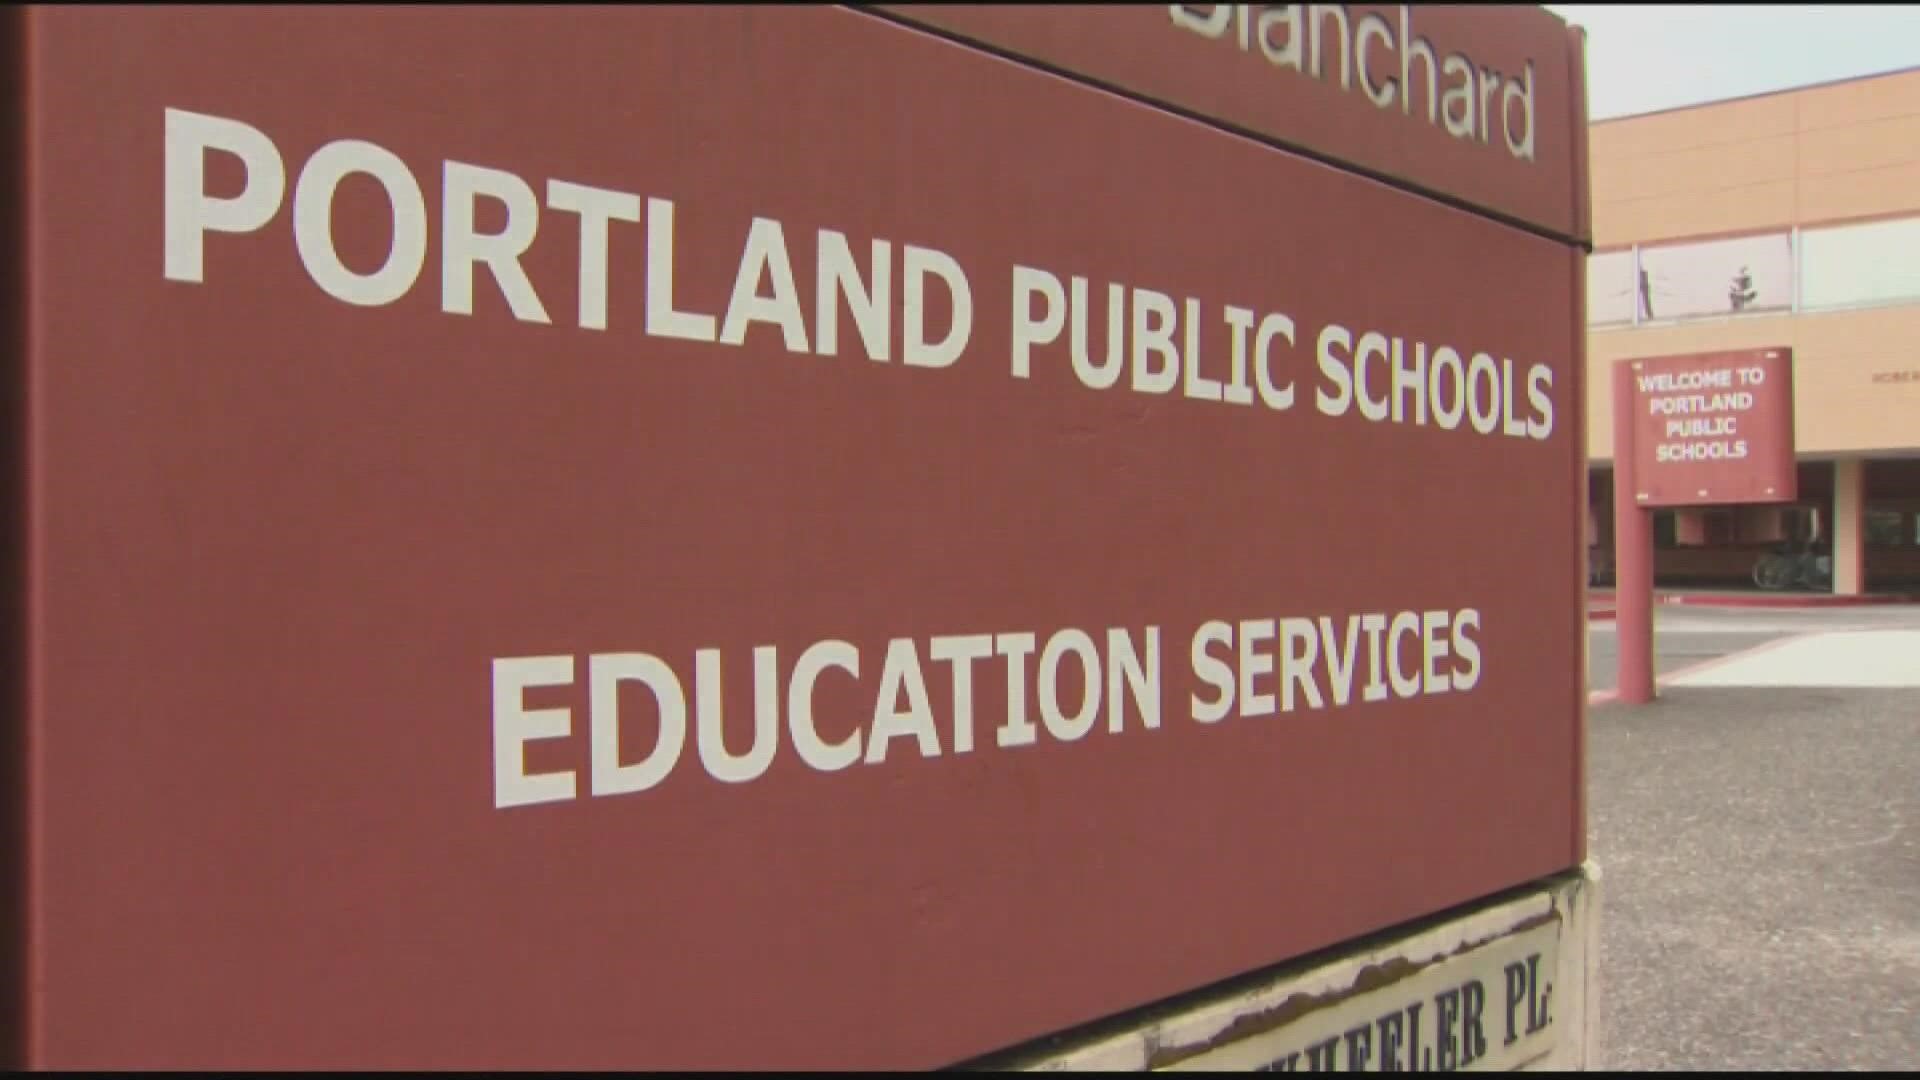 Following a recent shooting that injured a student at Cleveland High School, Portland Public Schools and the police are talking about restarting the SRO program.